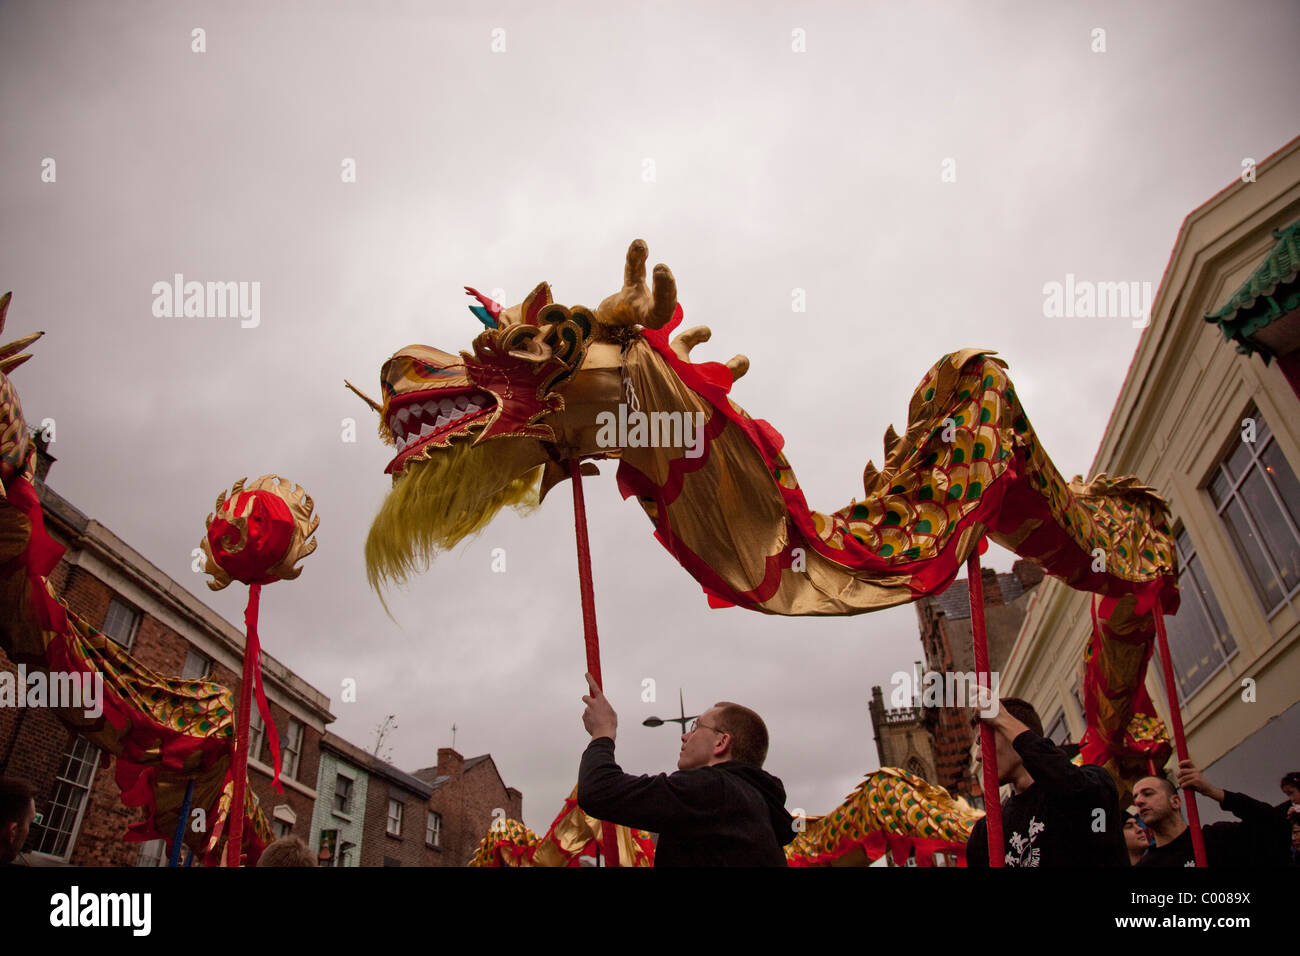 A ceremonial dragon puppet used in Chinese New Year celebrations Stock Photo